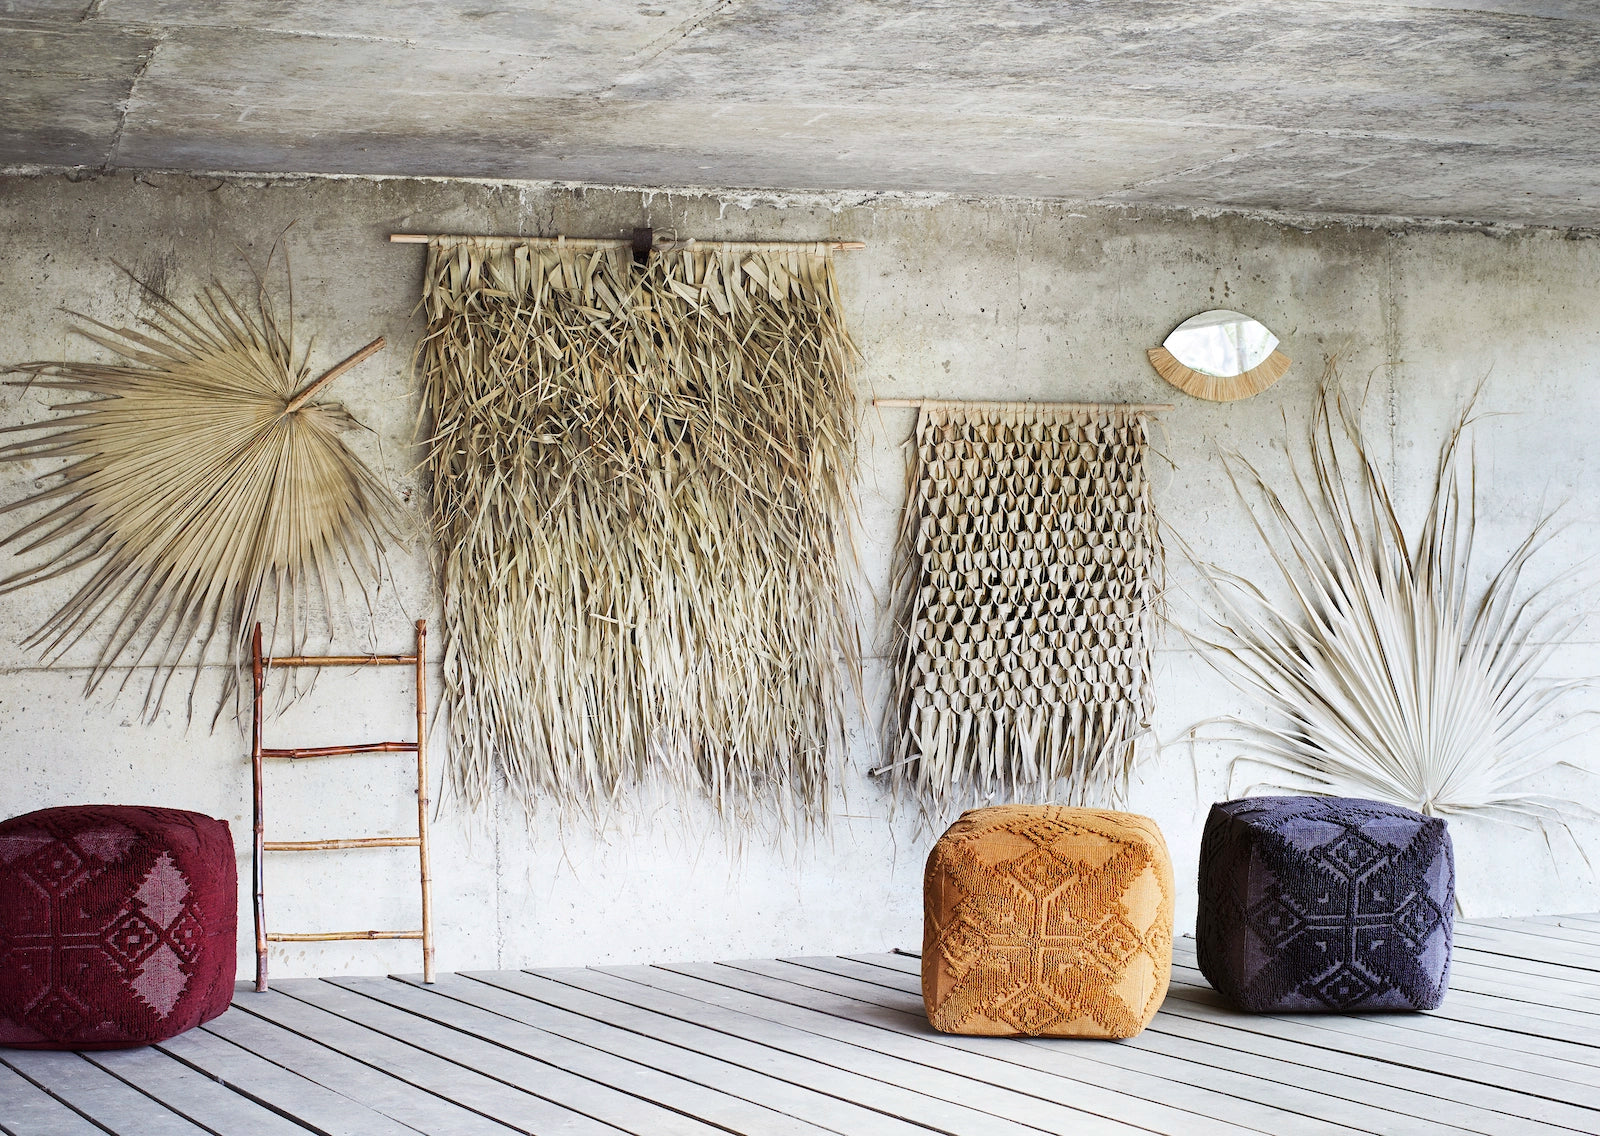 Dried palm decor and wall hangings for sale